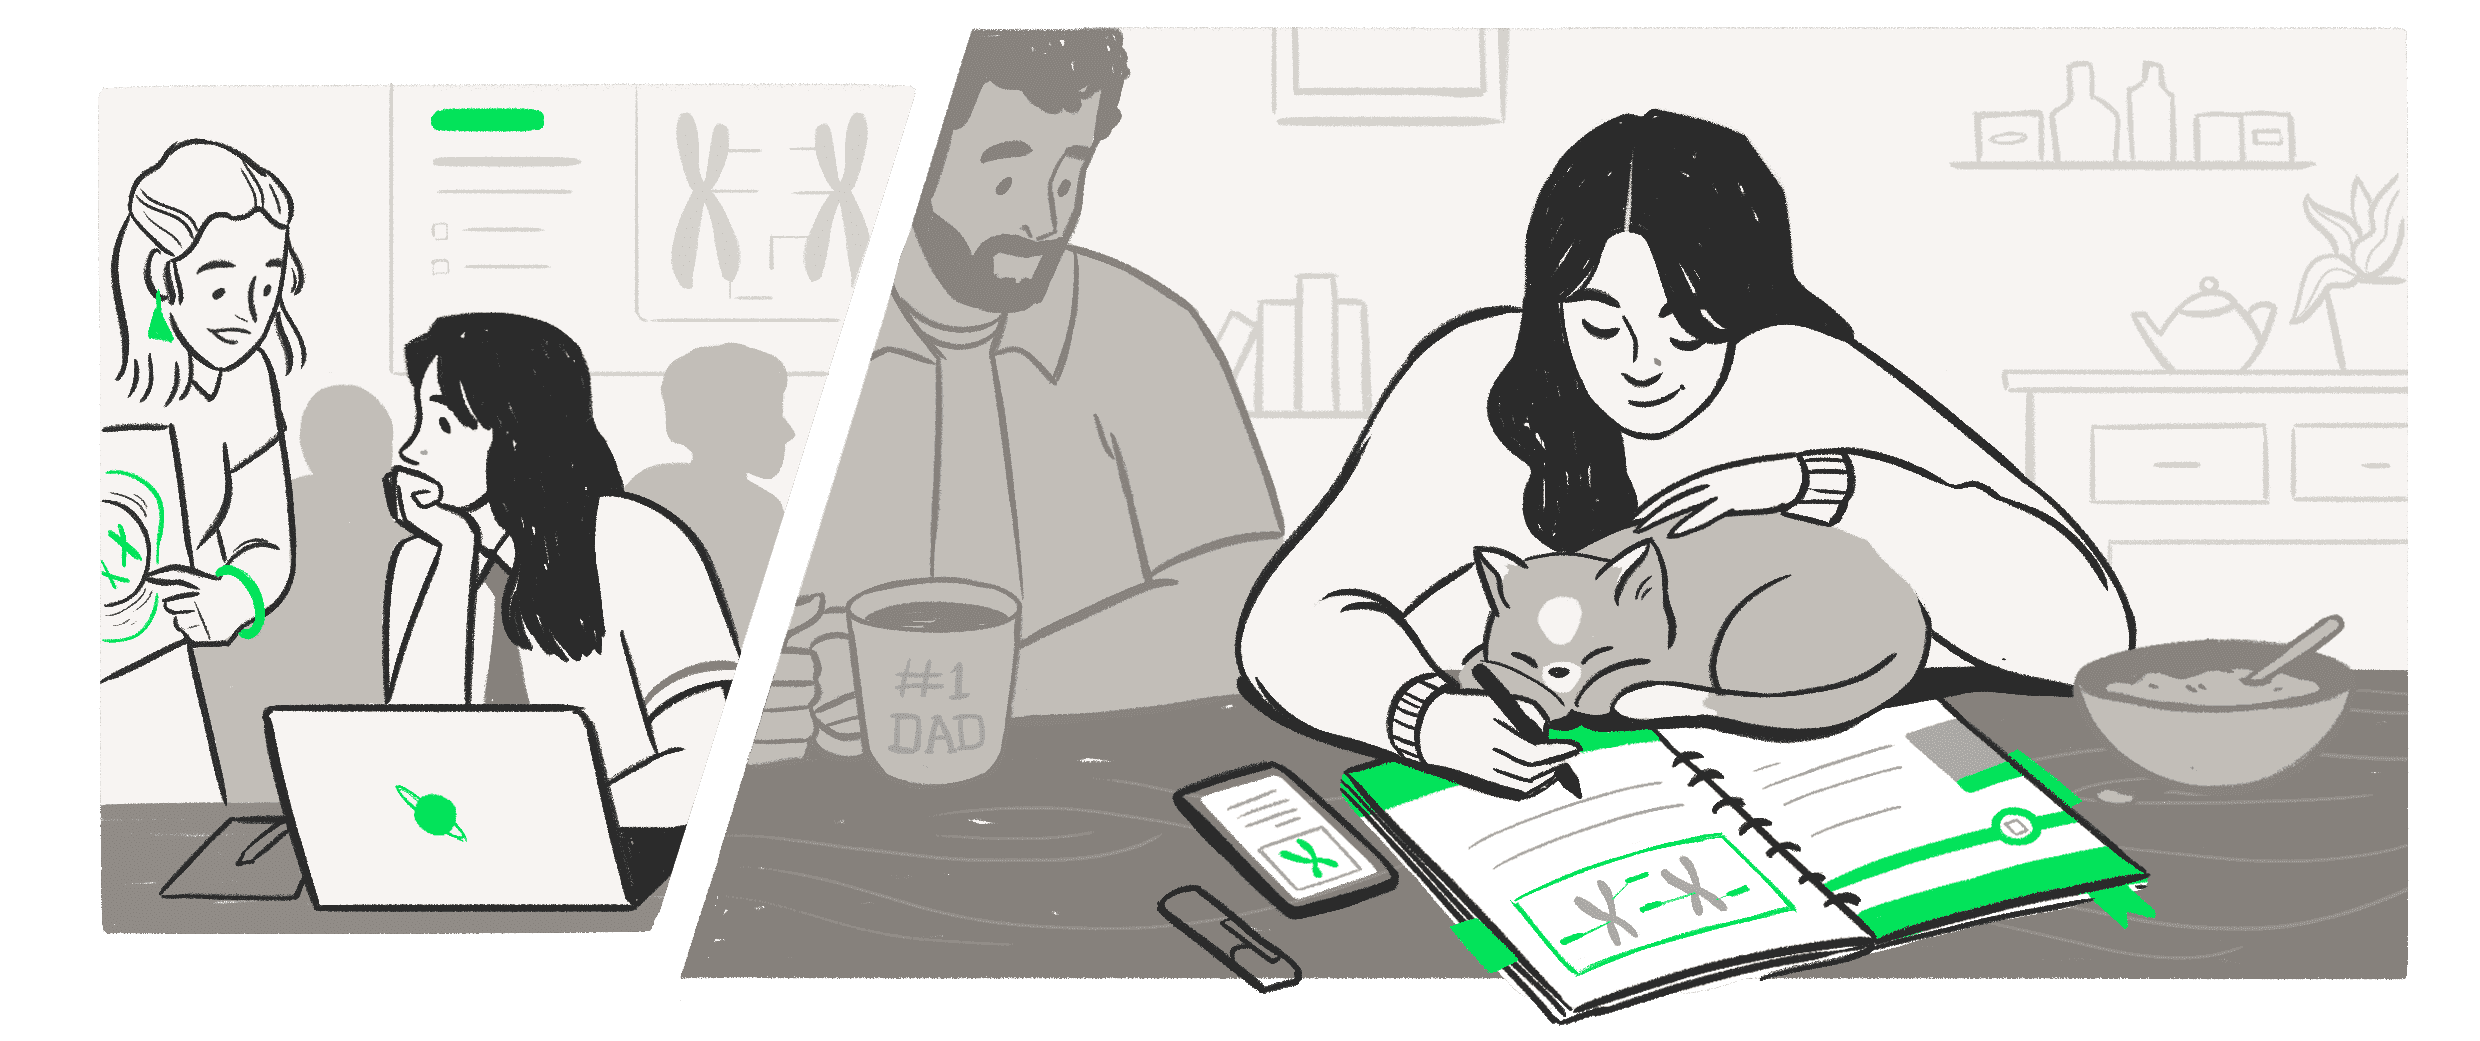 An illustration showing a student working in two locations, one at school with a teacher helping and one at home with her father helping